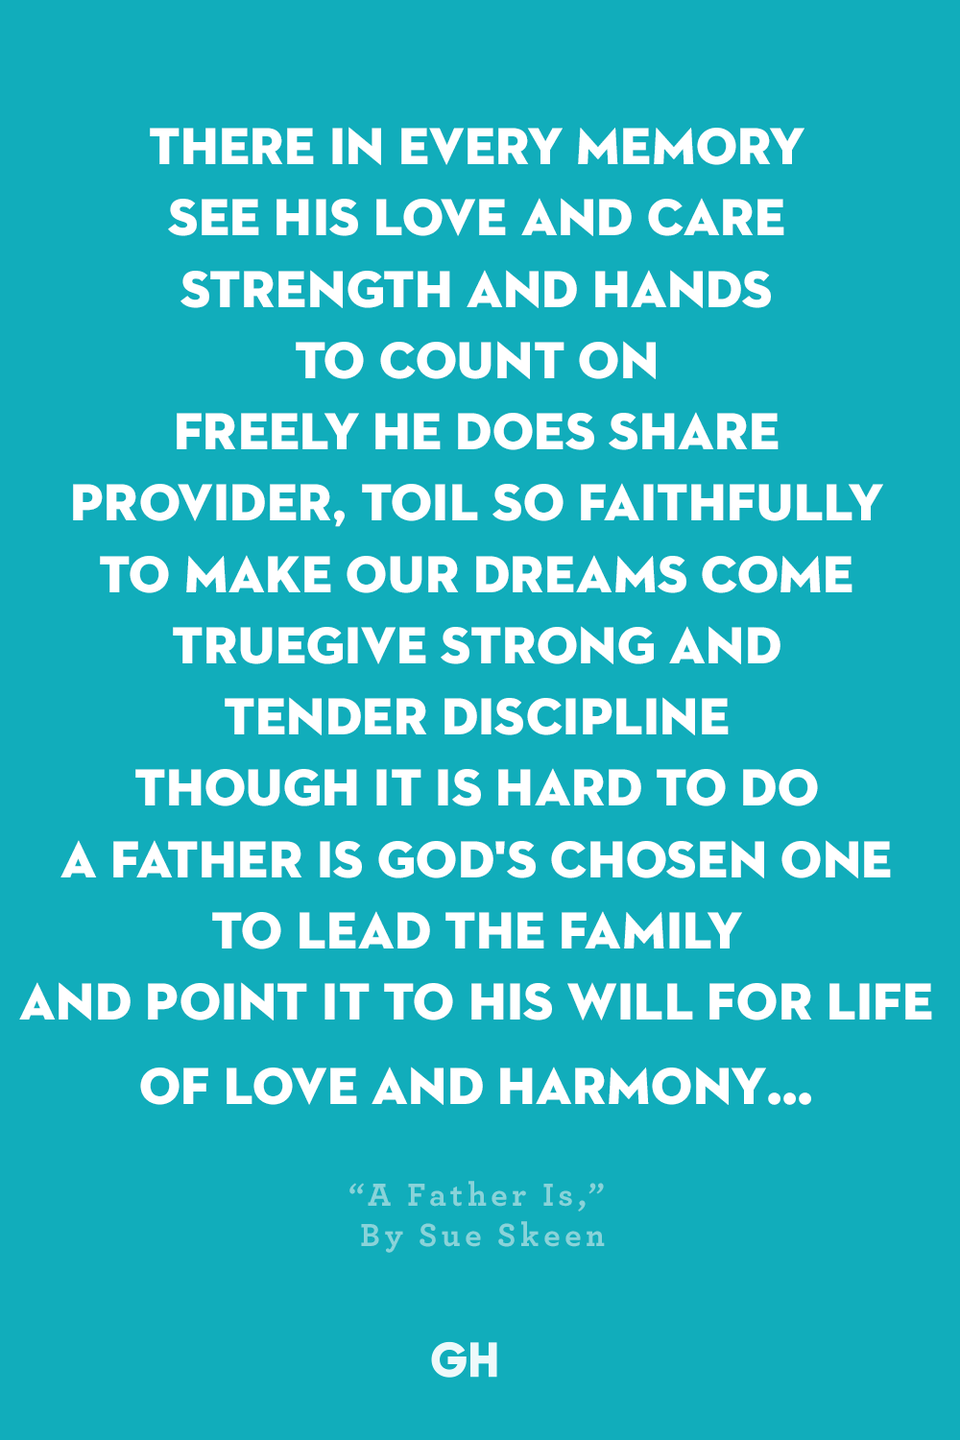 <p>There in every memory</p><p>See his love and care</p><p>Strength and hands to count on</p><p>Freely he does share</p><p>Provider, toil so faithfully</p><p>To make our dreams come true</p><p>Give strong and tender discipline</p><p>Though it is hard to do</p><p>A Father is God's chosen one</p><p>To lead the family</p><p>And point it to His will for life</p><p>Of love and harmony…</p>